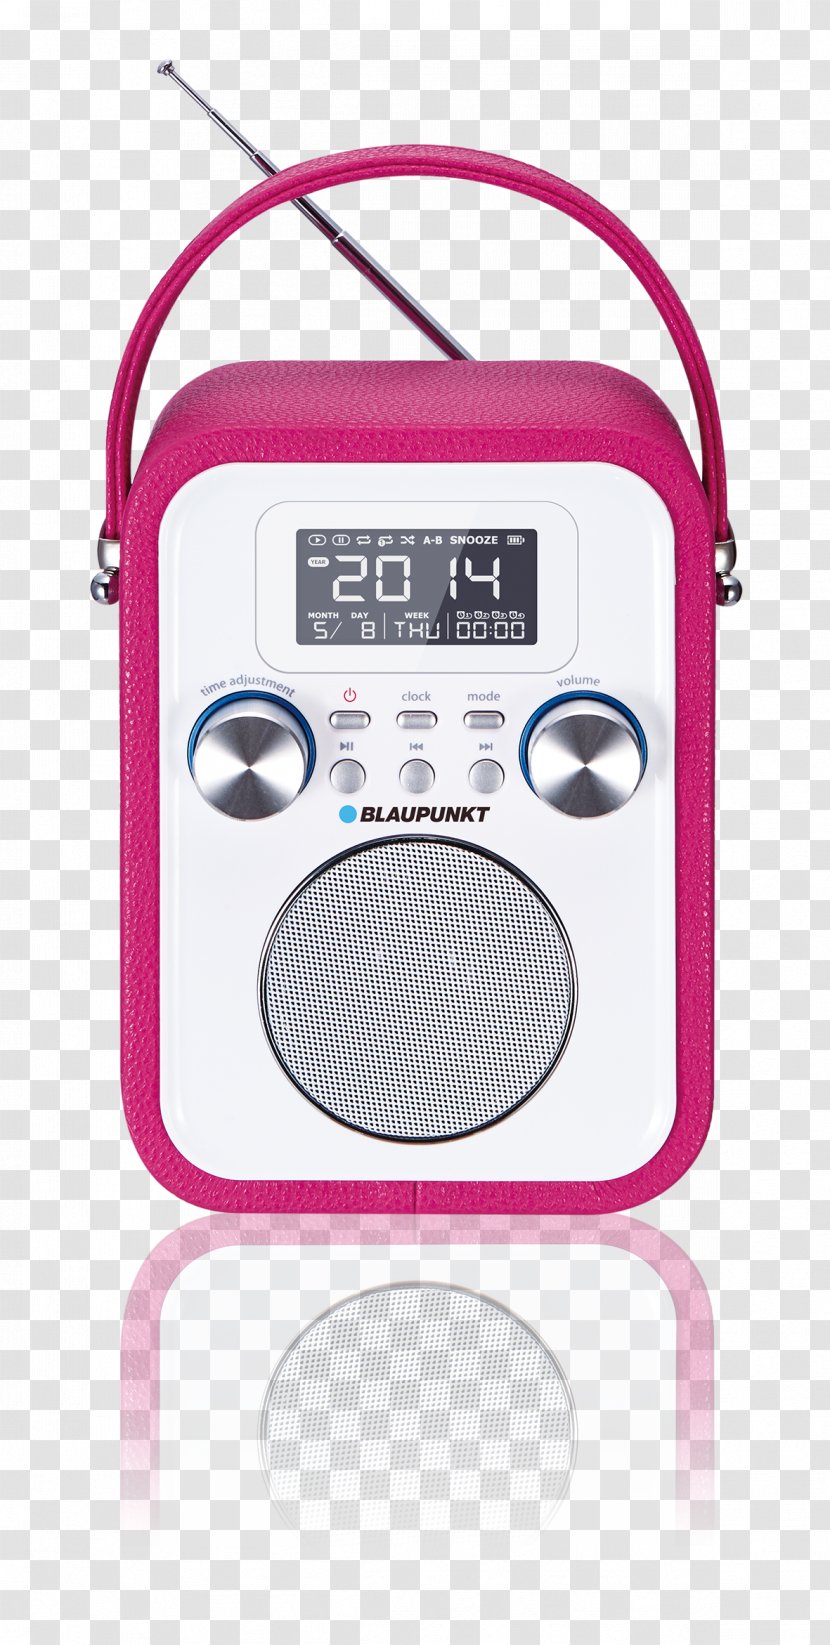 Blaupunkt Pp20bl Radio FM Broadcasting Frequency Modulation - Electronic Device Transparent PNG